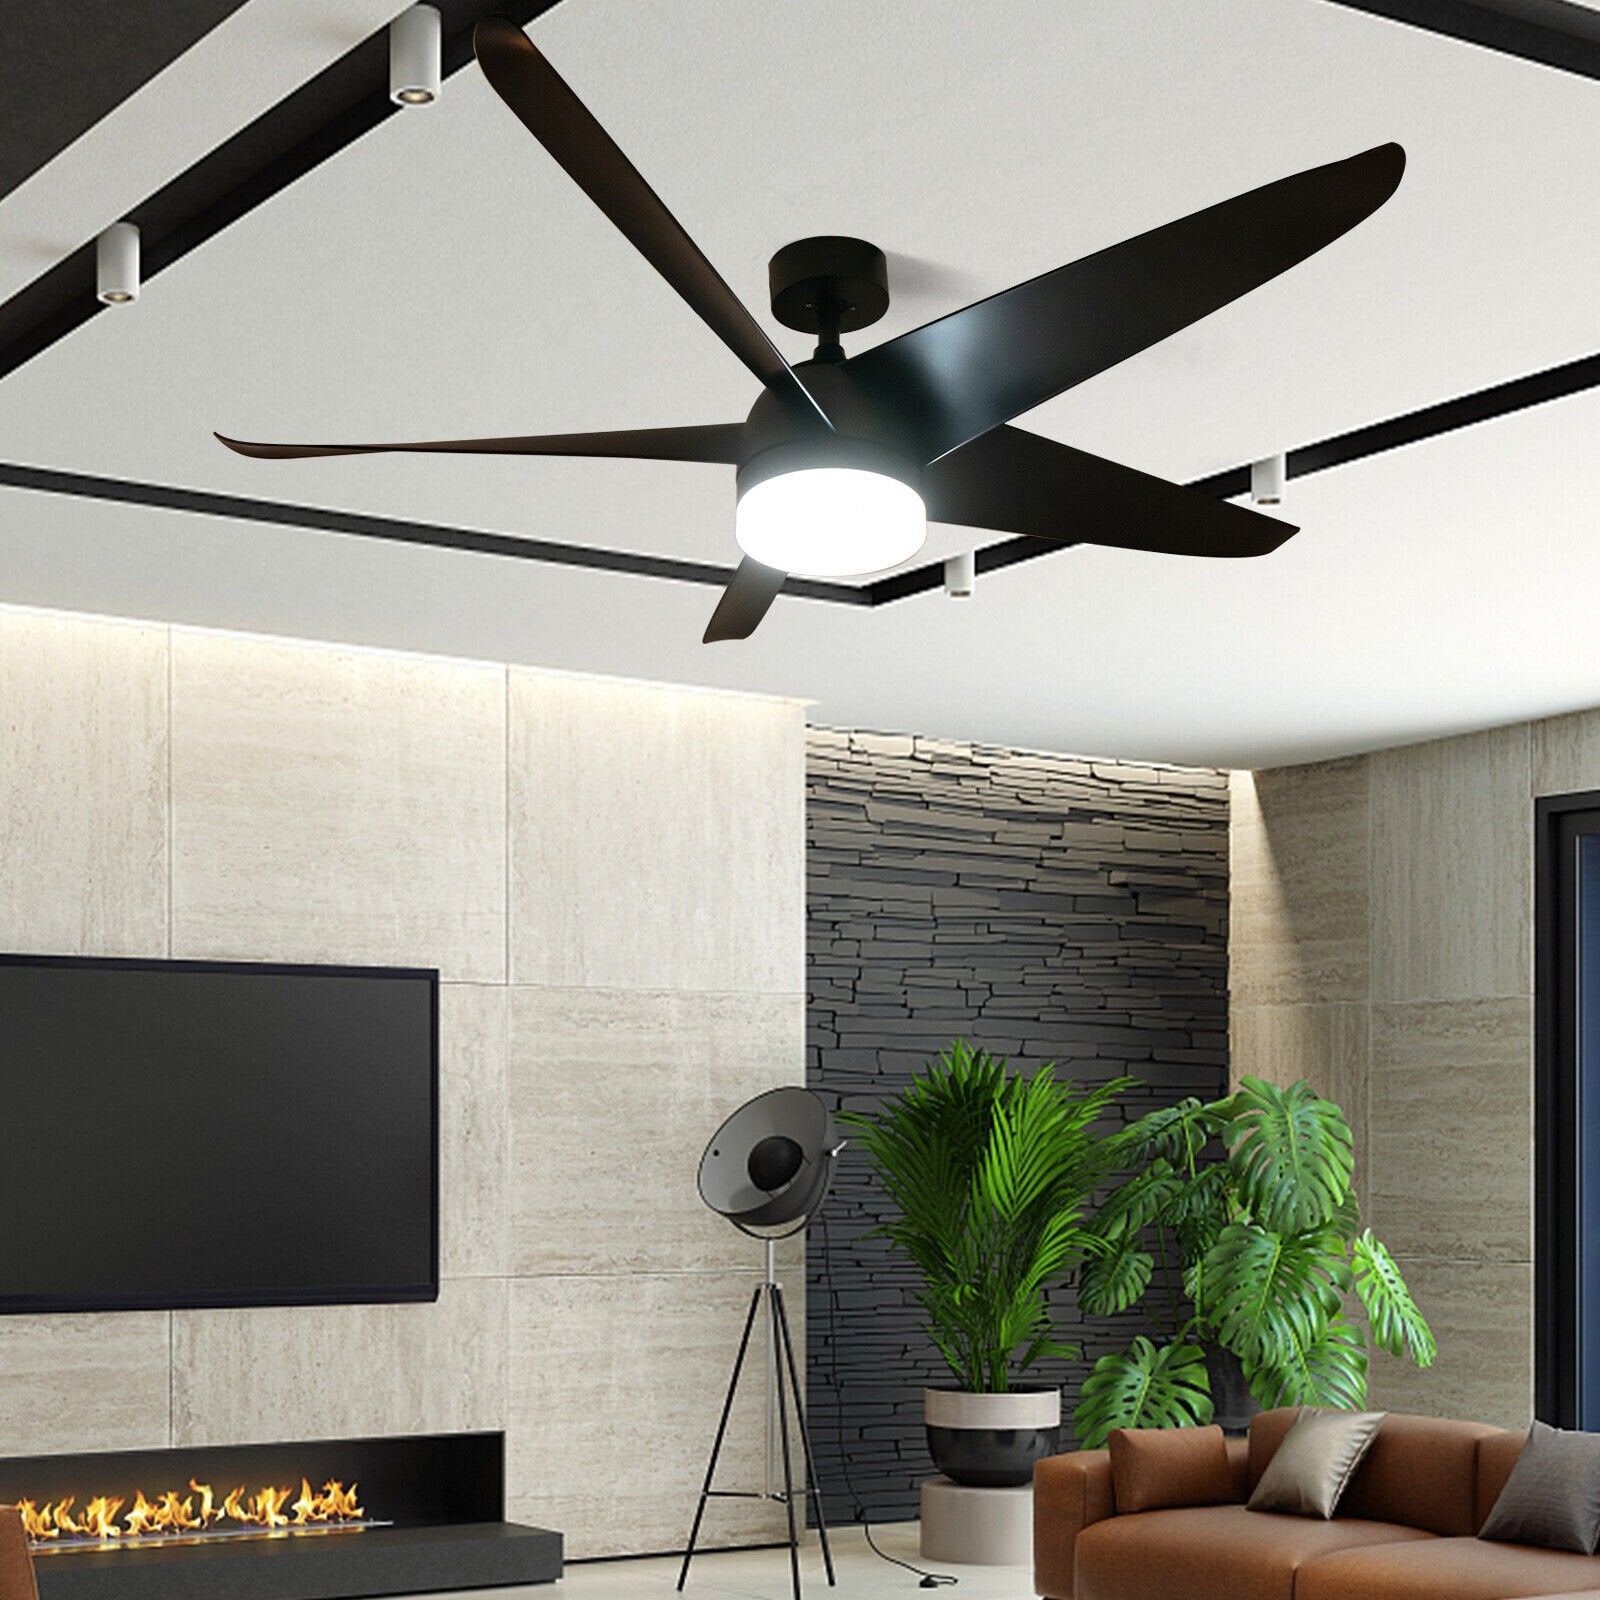 60 Inch Reversible Ceiling Fan with Light, Black at Gallery Canada